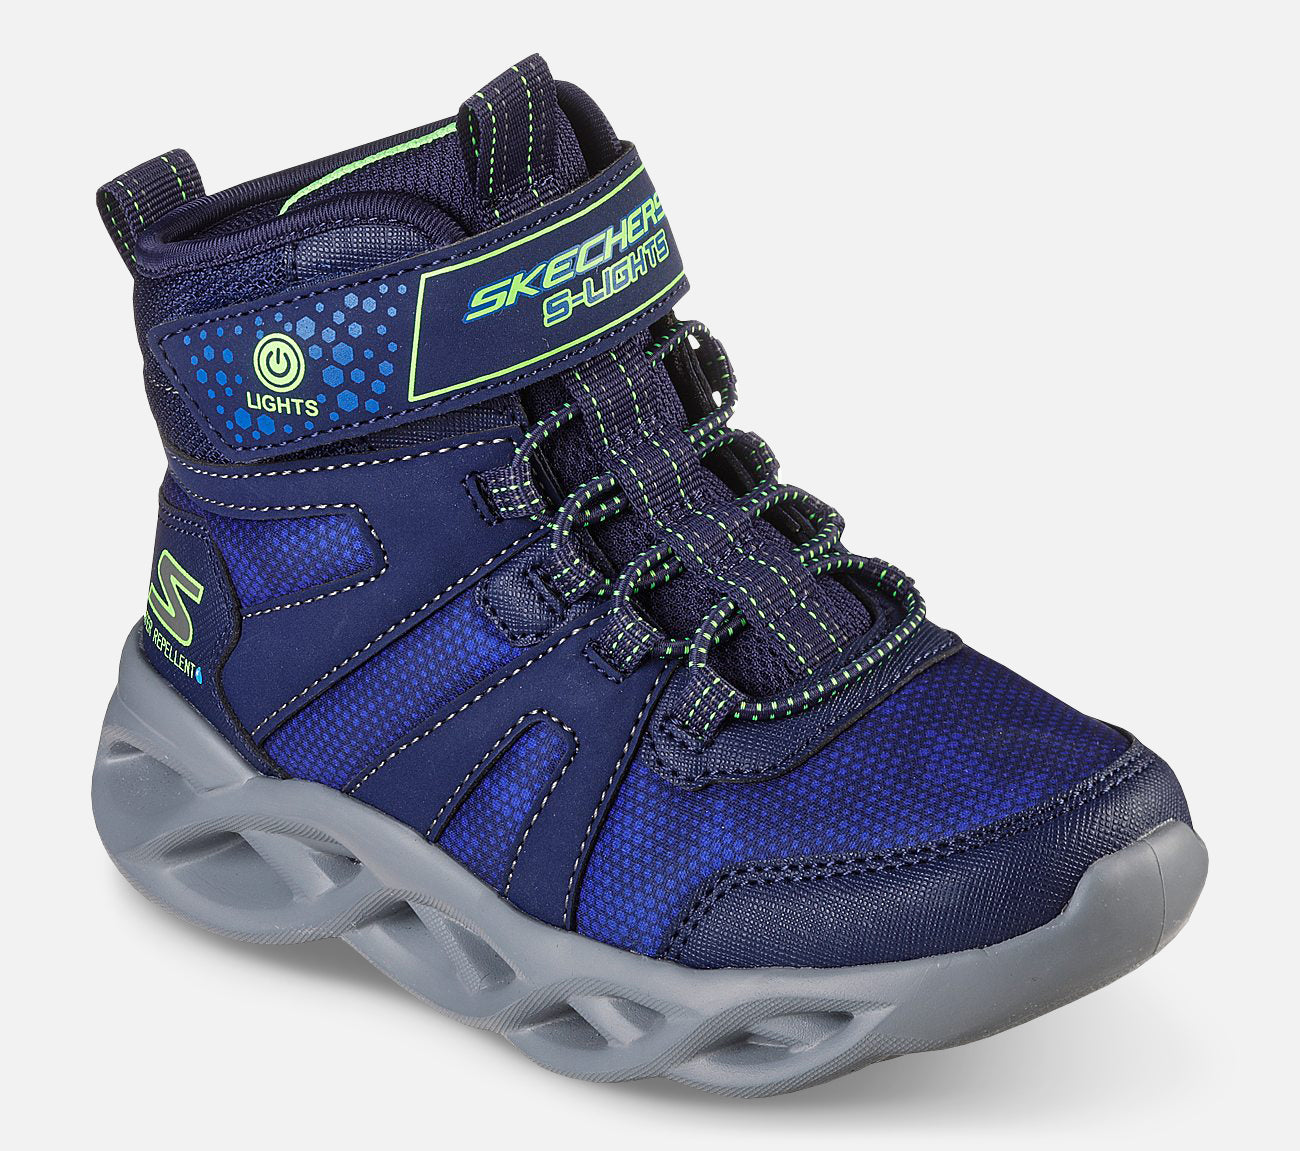 Twisted-Brights Boot Skechers